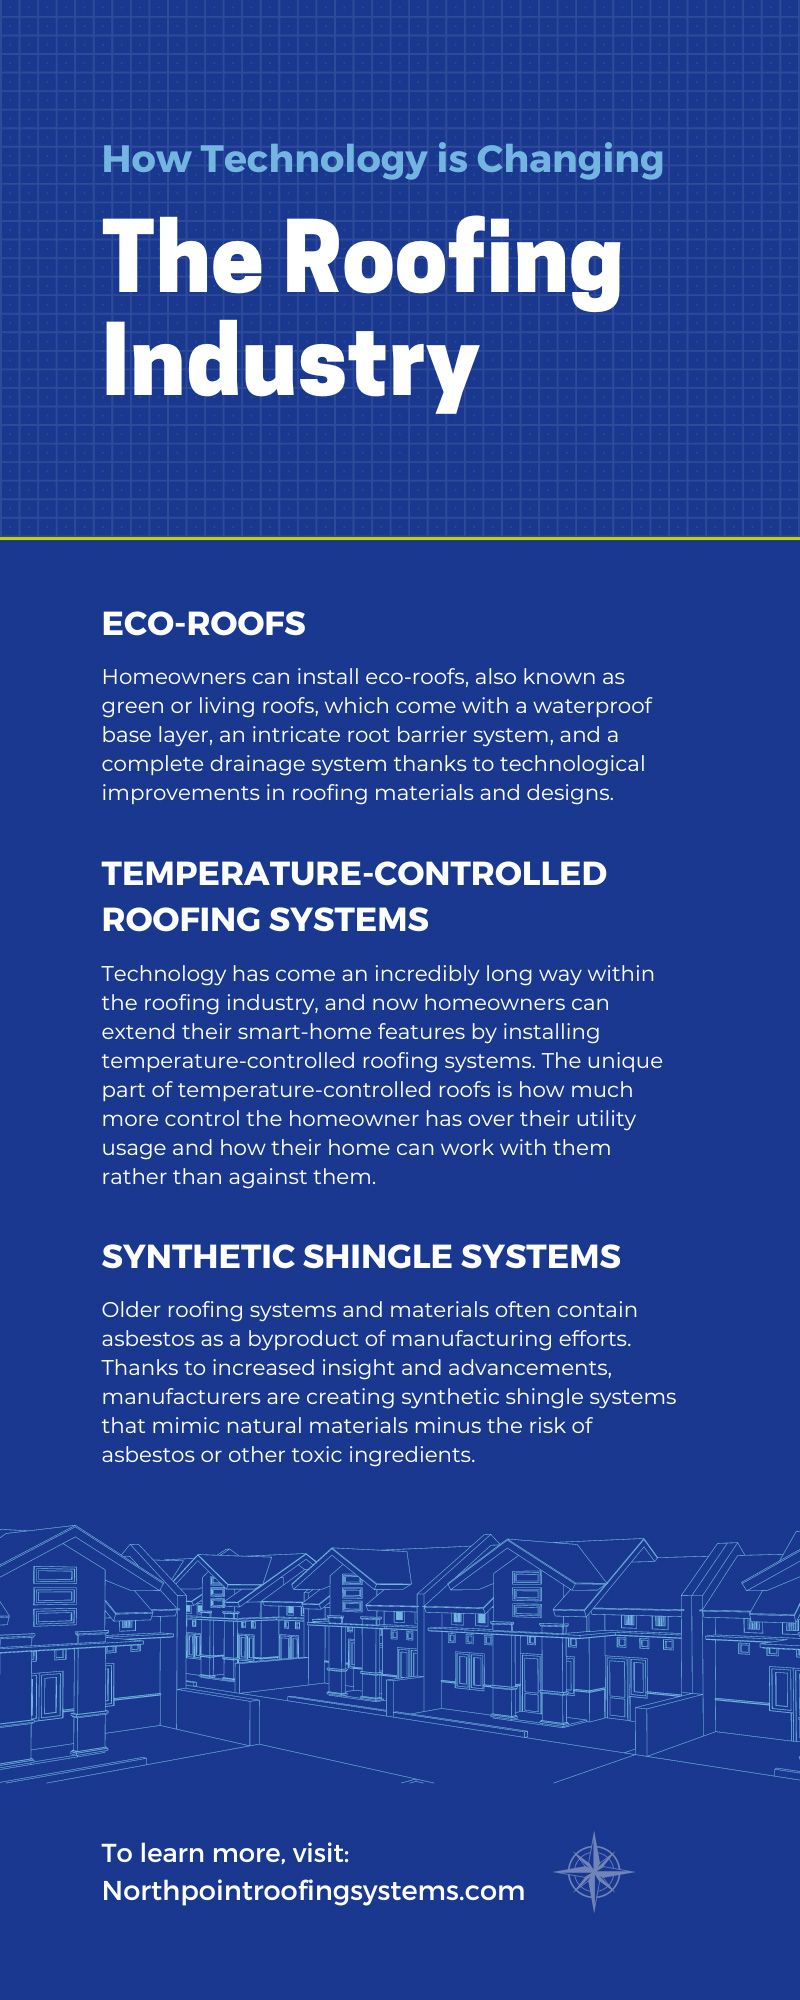 How Technology Is Changing the Roofing Industry